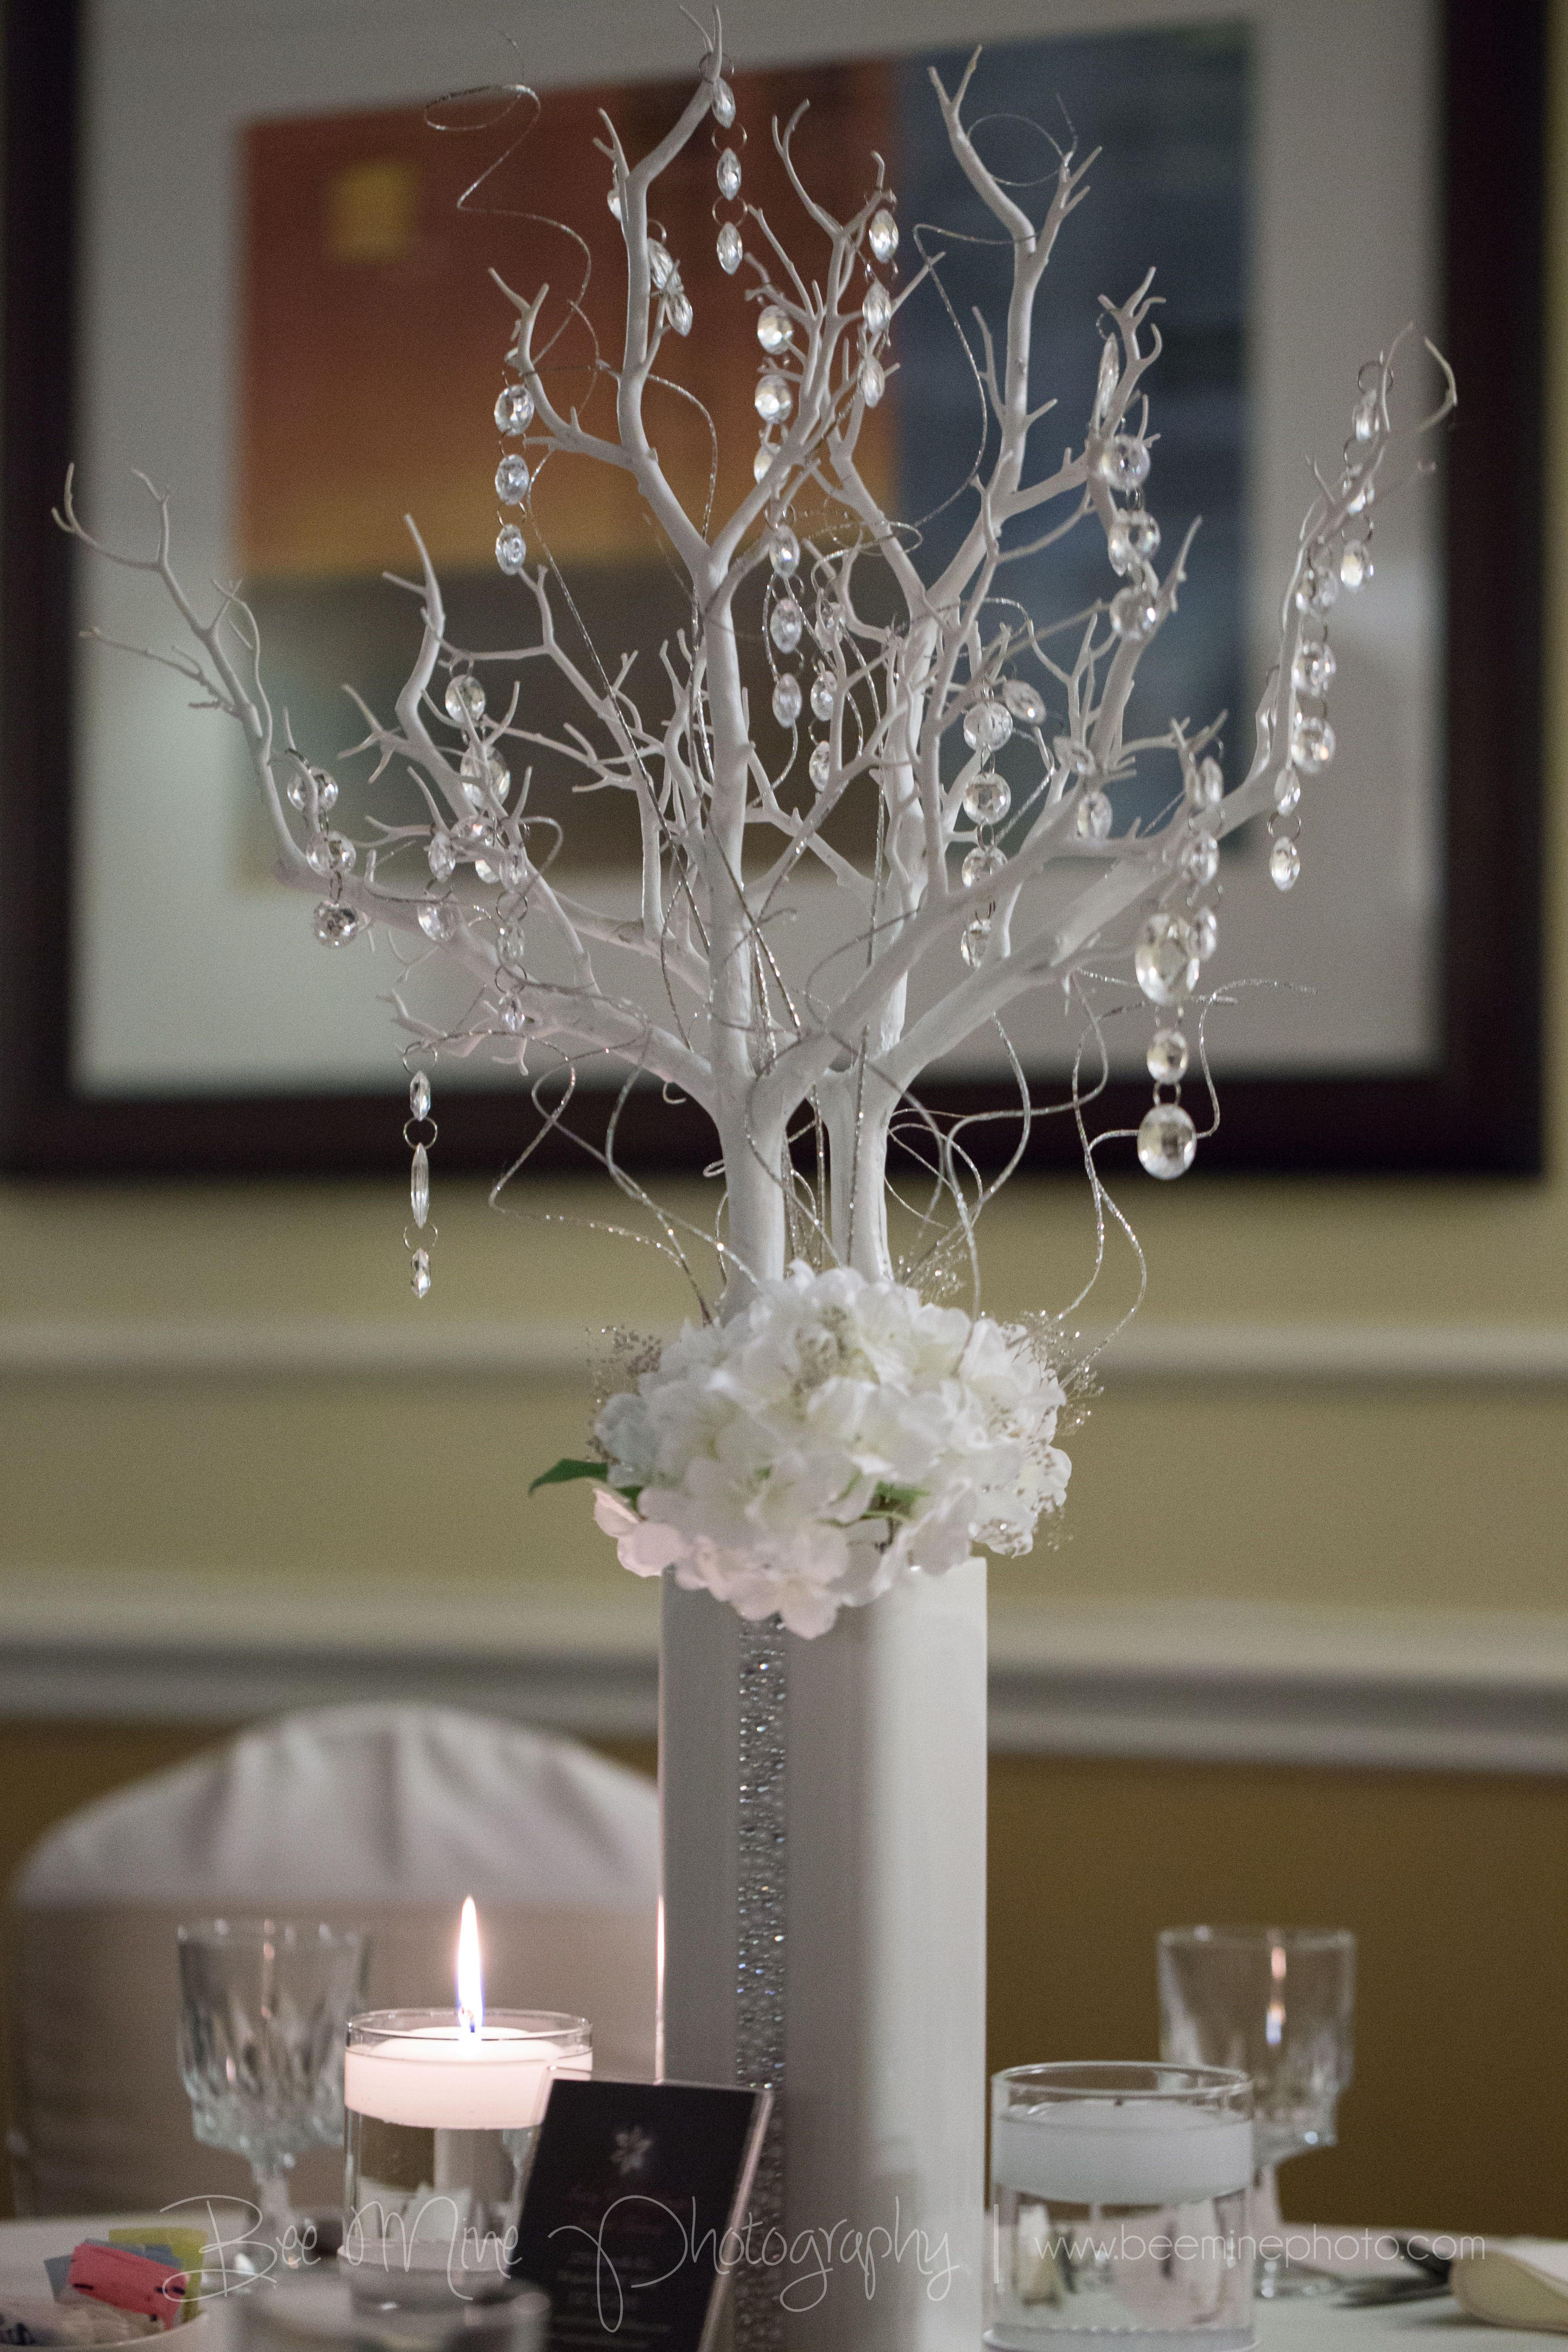 Tall Thin Vase Of Decorative Twig Tree New Dollar Tree Wedding Decorations Awesome H Throughout Decorative Twig Tree New Dollar Tree Wedding Decorations Awesome H Vases Dollar Vase I 0d